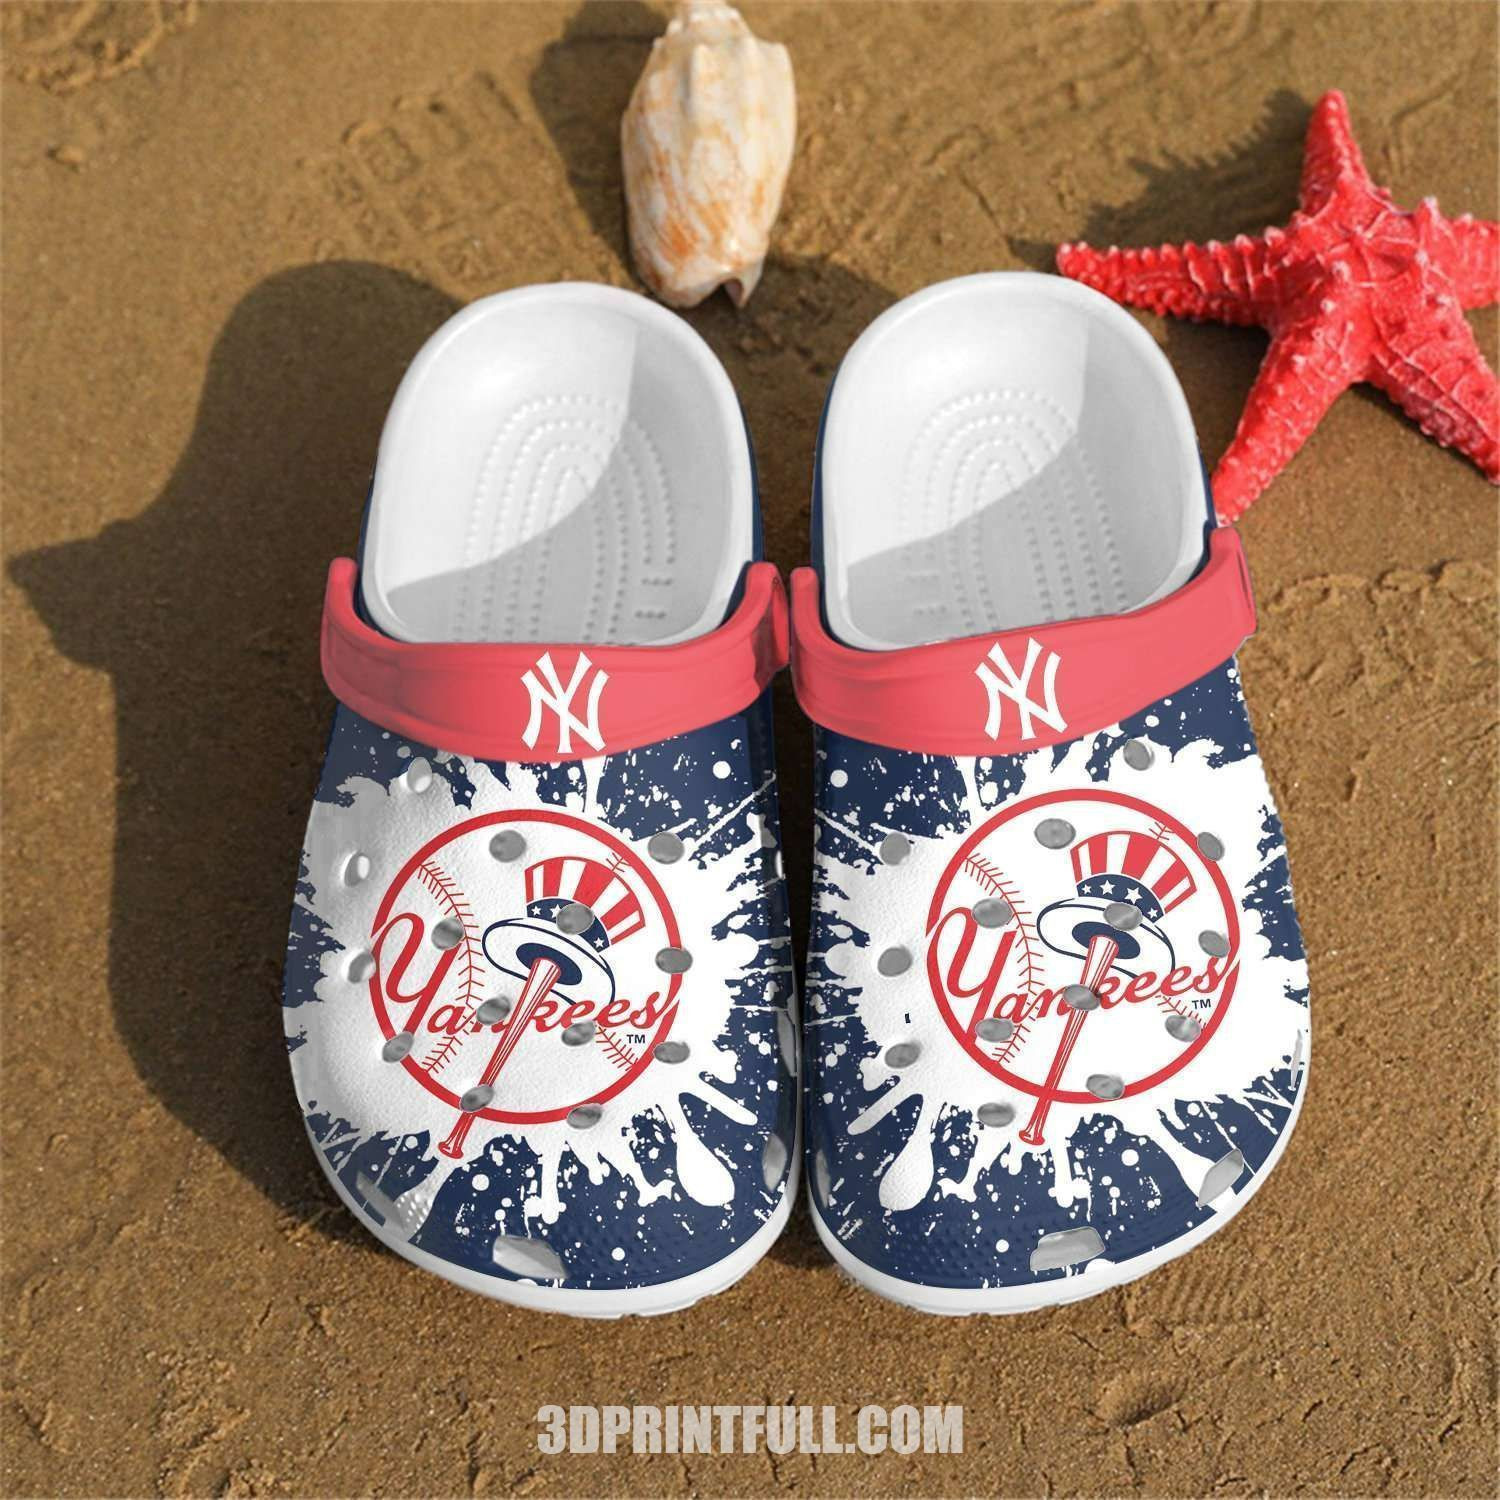 New York Yankees Mlb Team Gift For Fan 4 Rubber Crocs Clog Shoescrocband Clogs